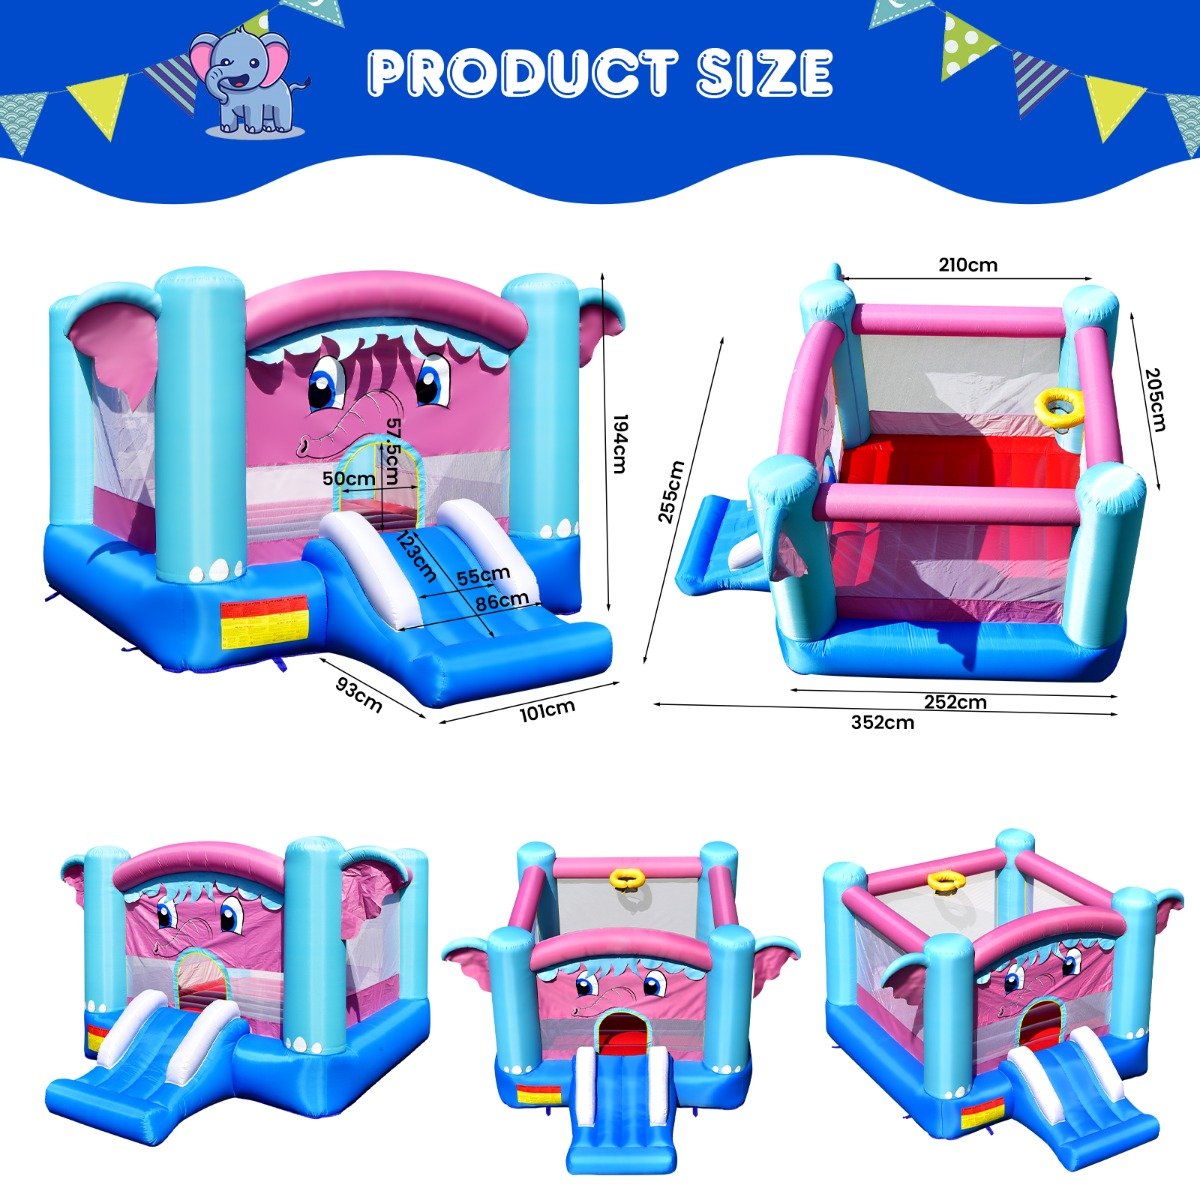 Children's Elephant Theme Inflatable Castle - 3-in-1 Jumping and Play